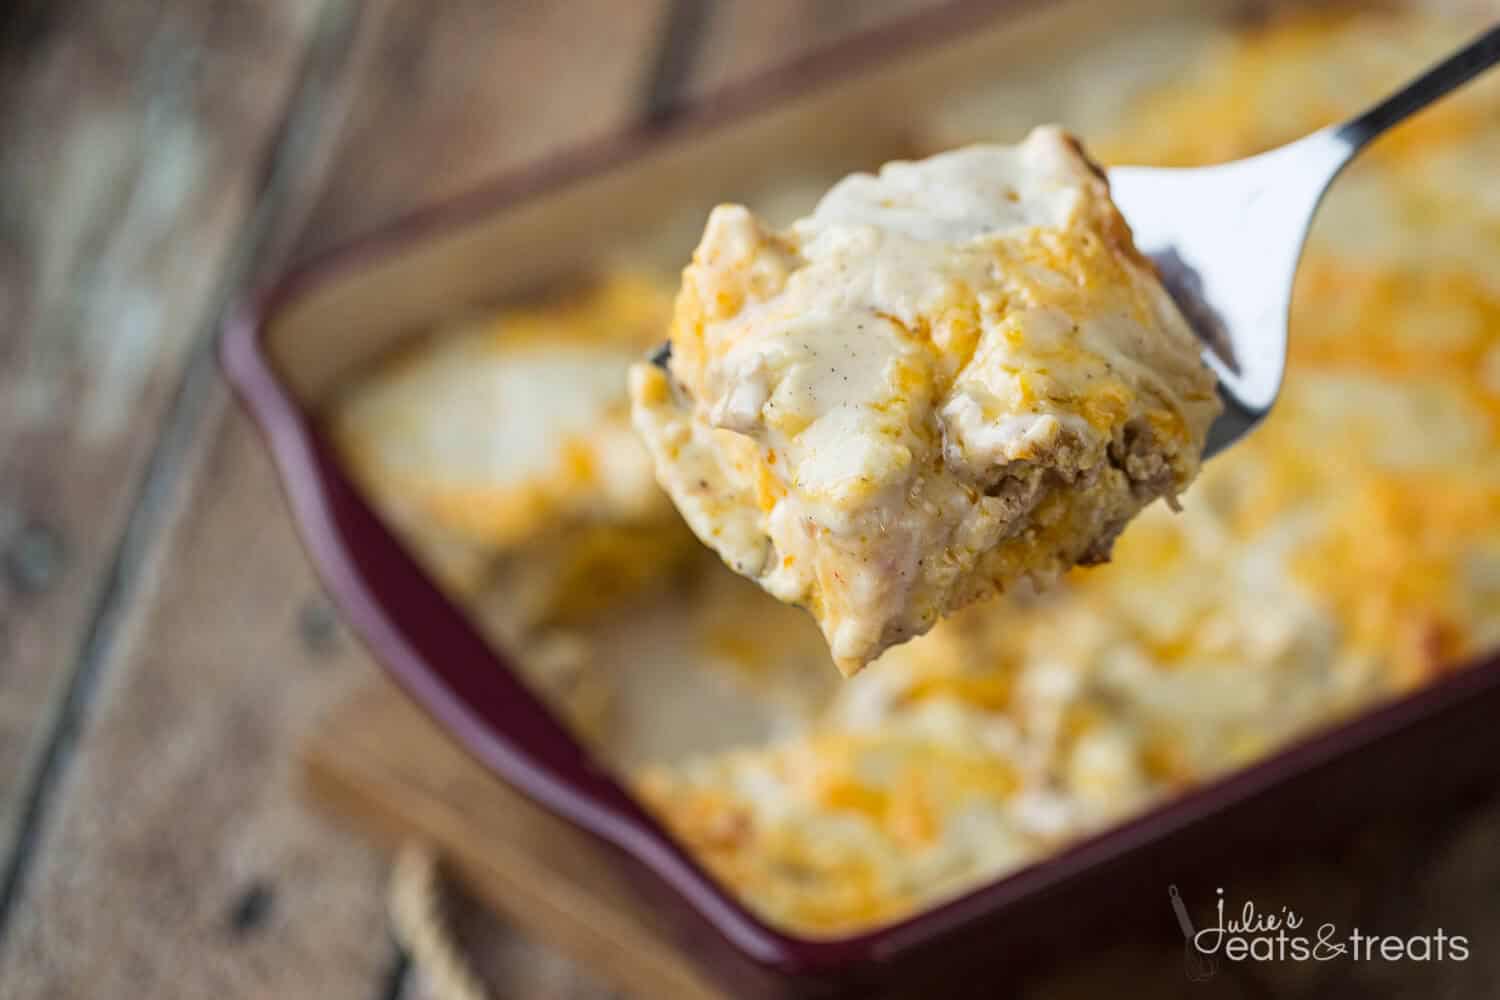 Biscuits and Gravy Overnight Breakfast Casserole ~ Comforting, Hearty Breakfast Casserole That is Prepared the Night Before and Baked in the Morning! Biscuits Loaded with Gravy, Sausage, Eggs and Cheese!